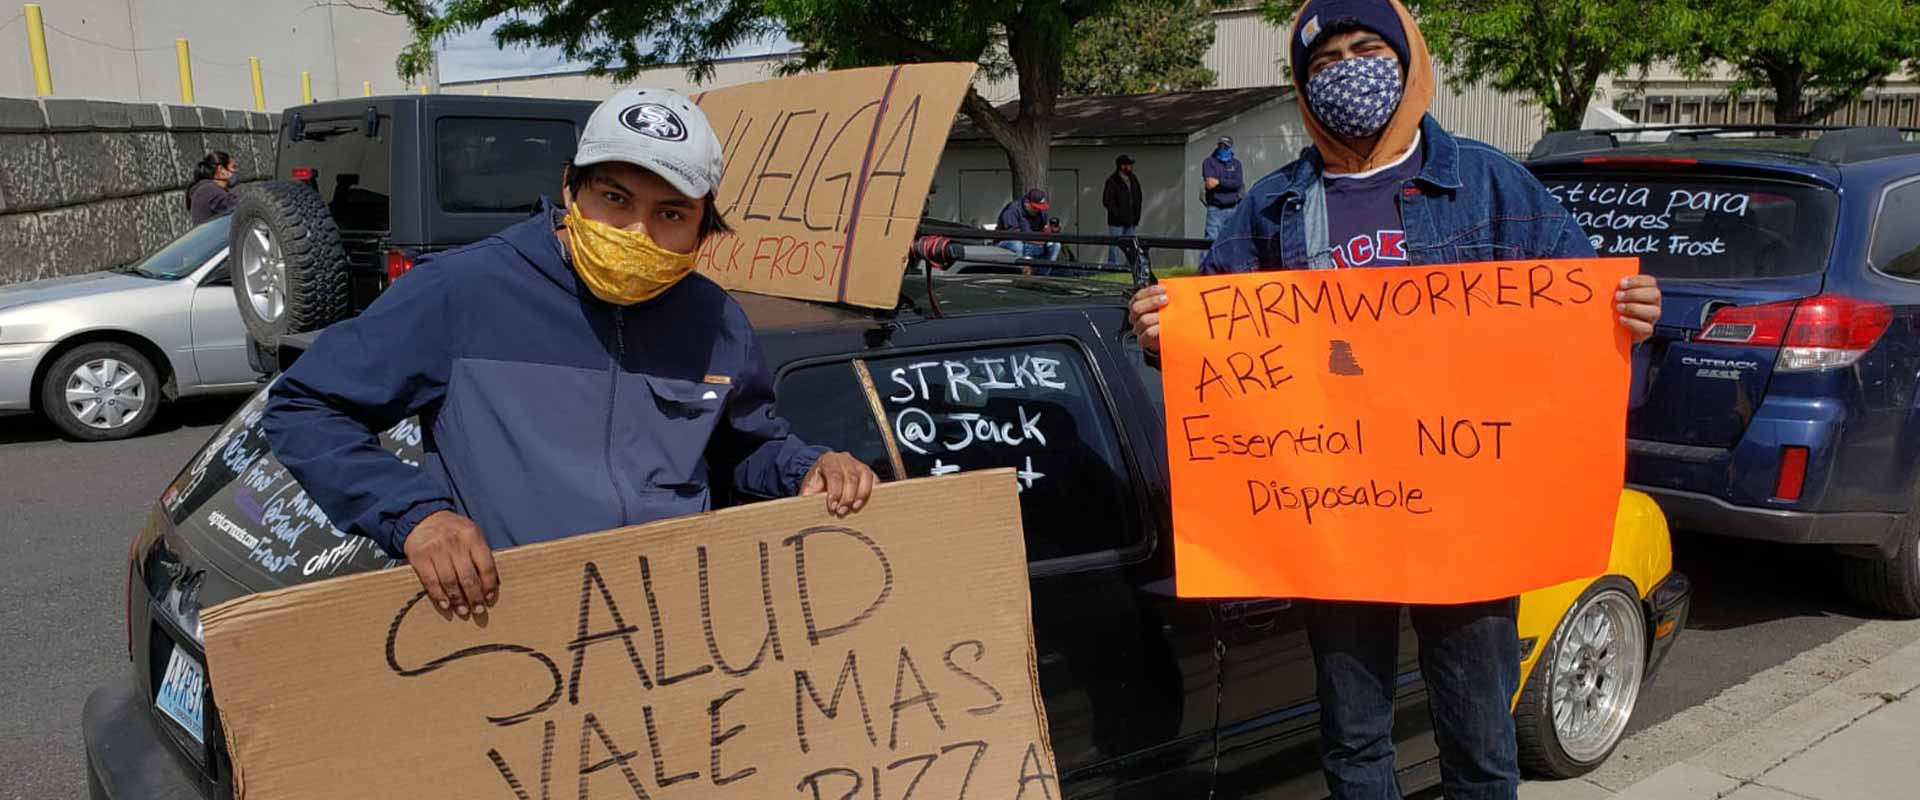 Two people wearing bandanas as face masks hold signs with one reading, “Farmworkers are essential not disposable.”